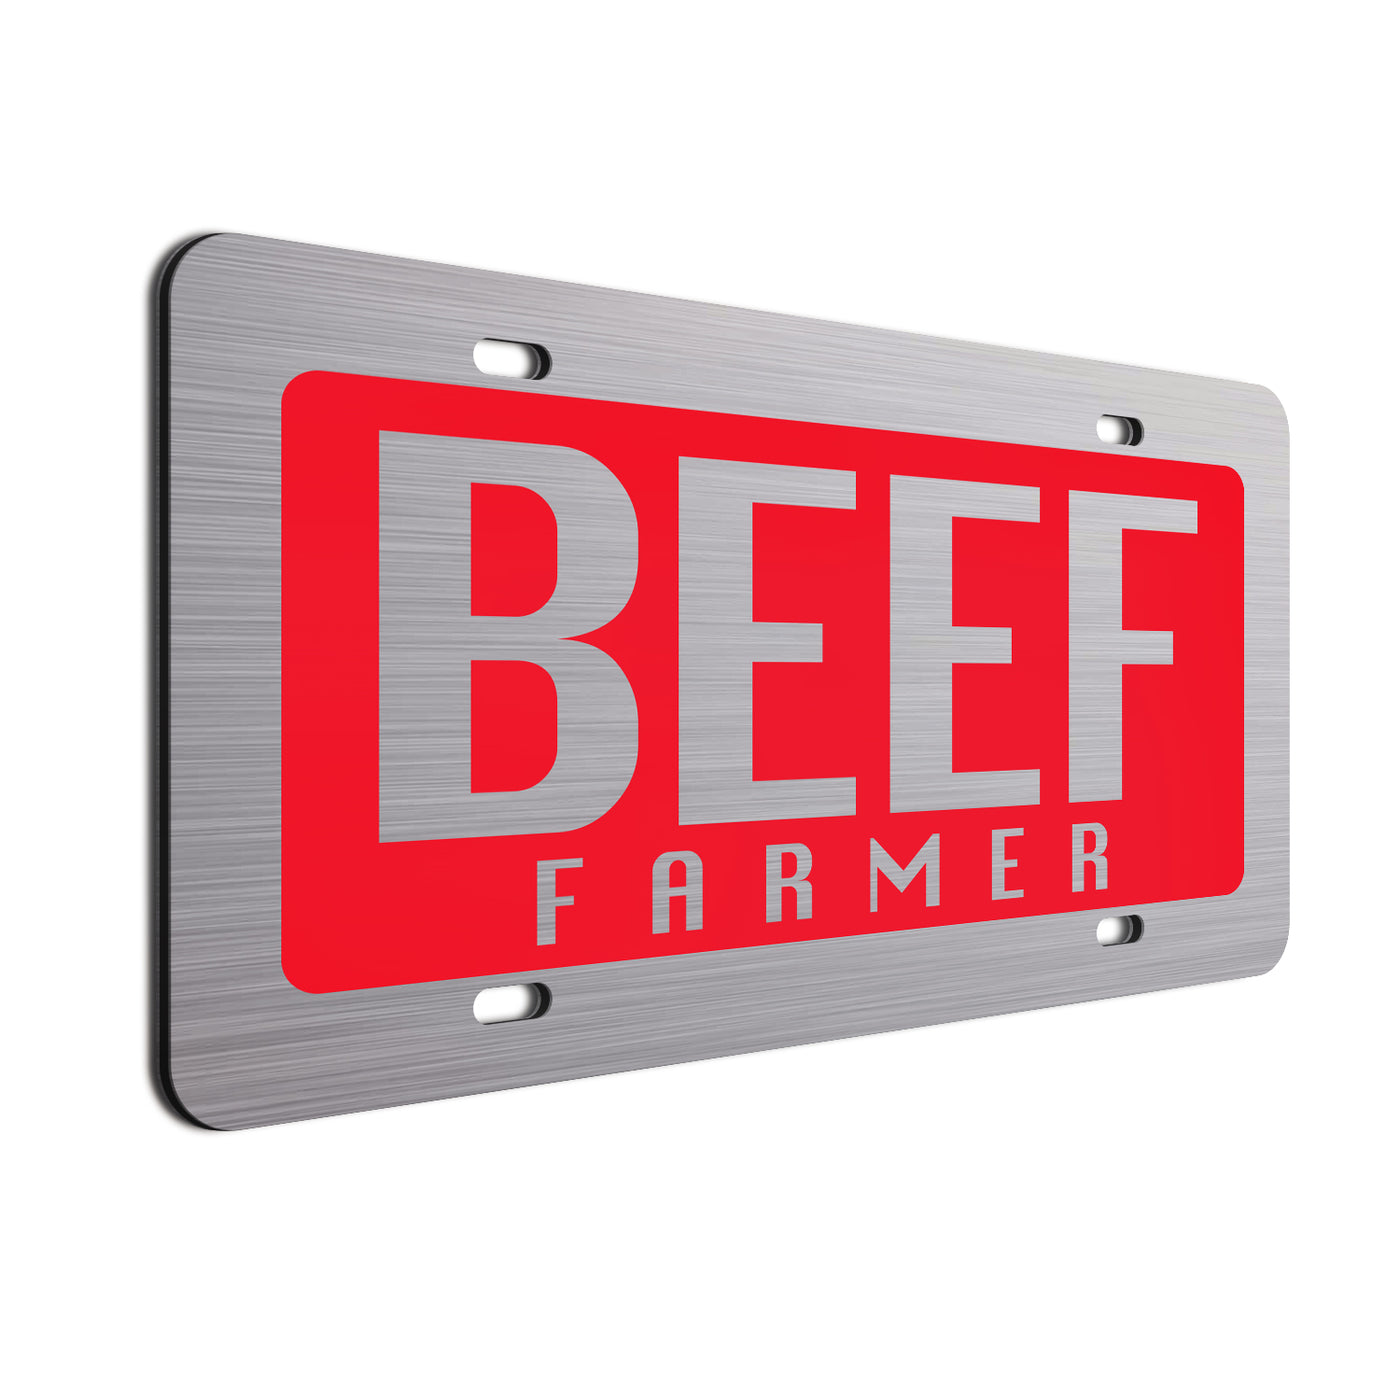 BEEF License Plate: Red